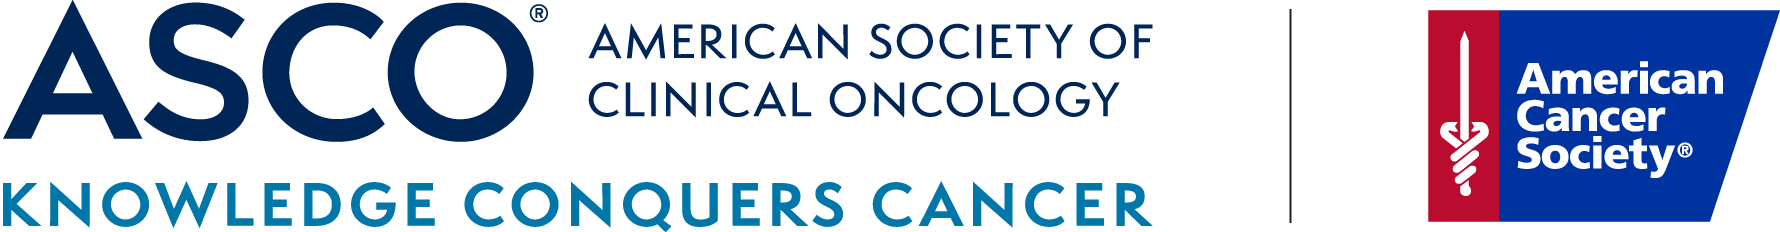 ASCO &reg; American Society of Clinical Oncology; Knowledge Conquers Cancer; American Cancer Society &reg;